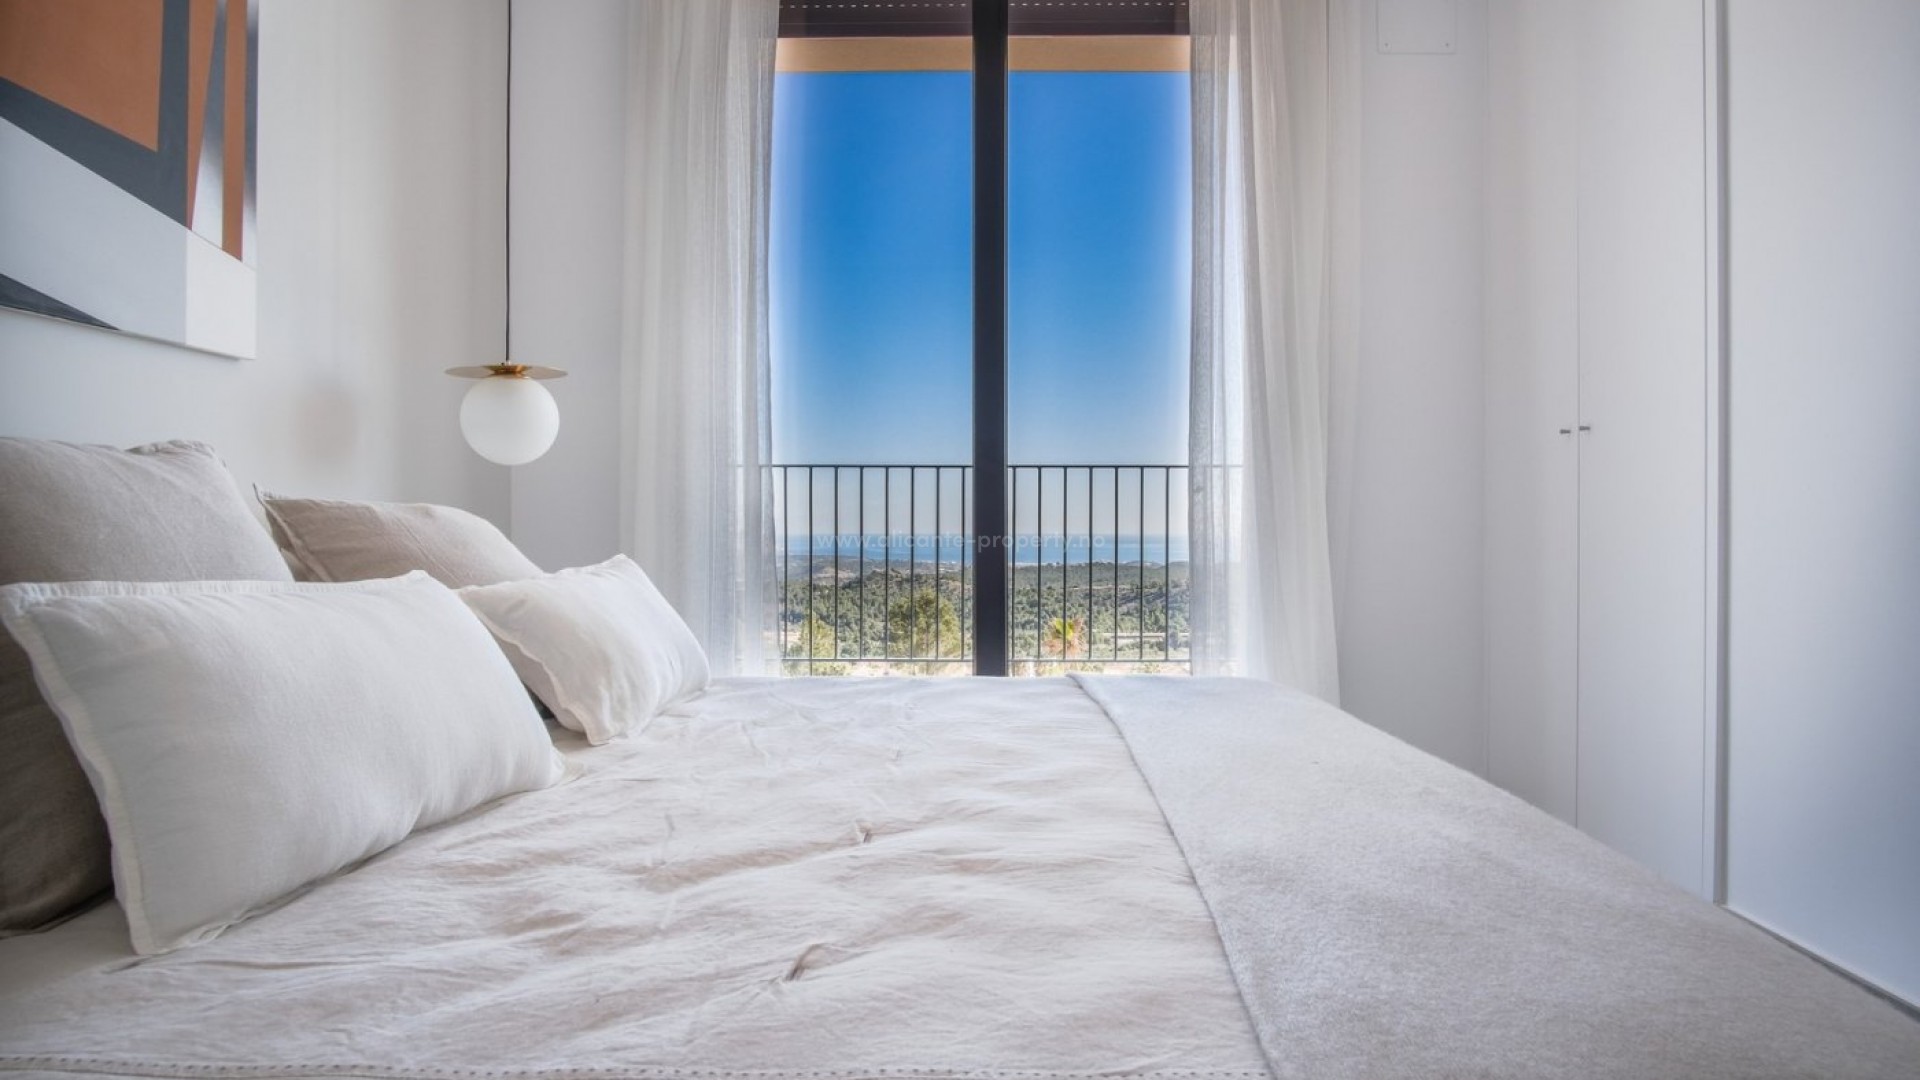 Independent villas with sea views at Polop in the Alicante province, 2/3 bedrooms, 2 bathrooms, communal swimming pool, 10 km from Benidorm and its beaches.